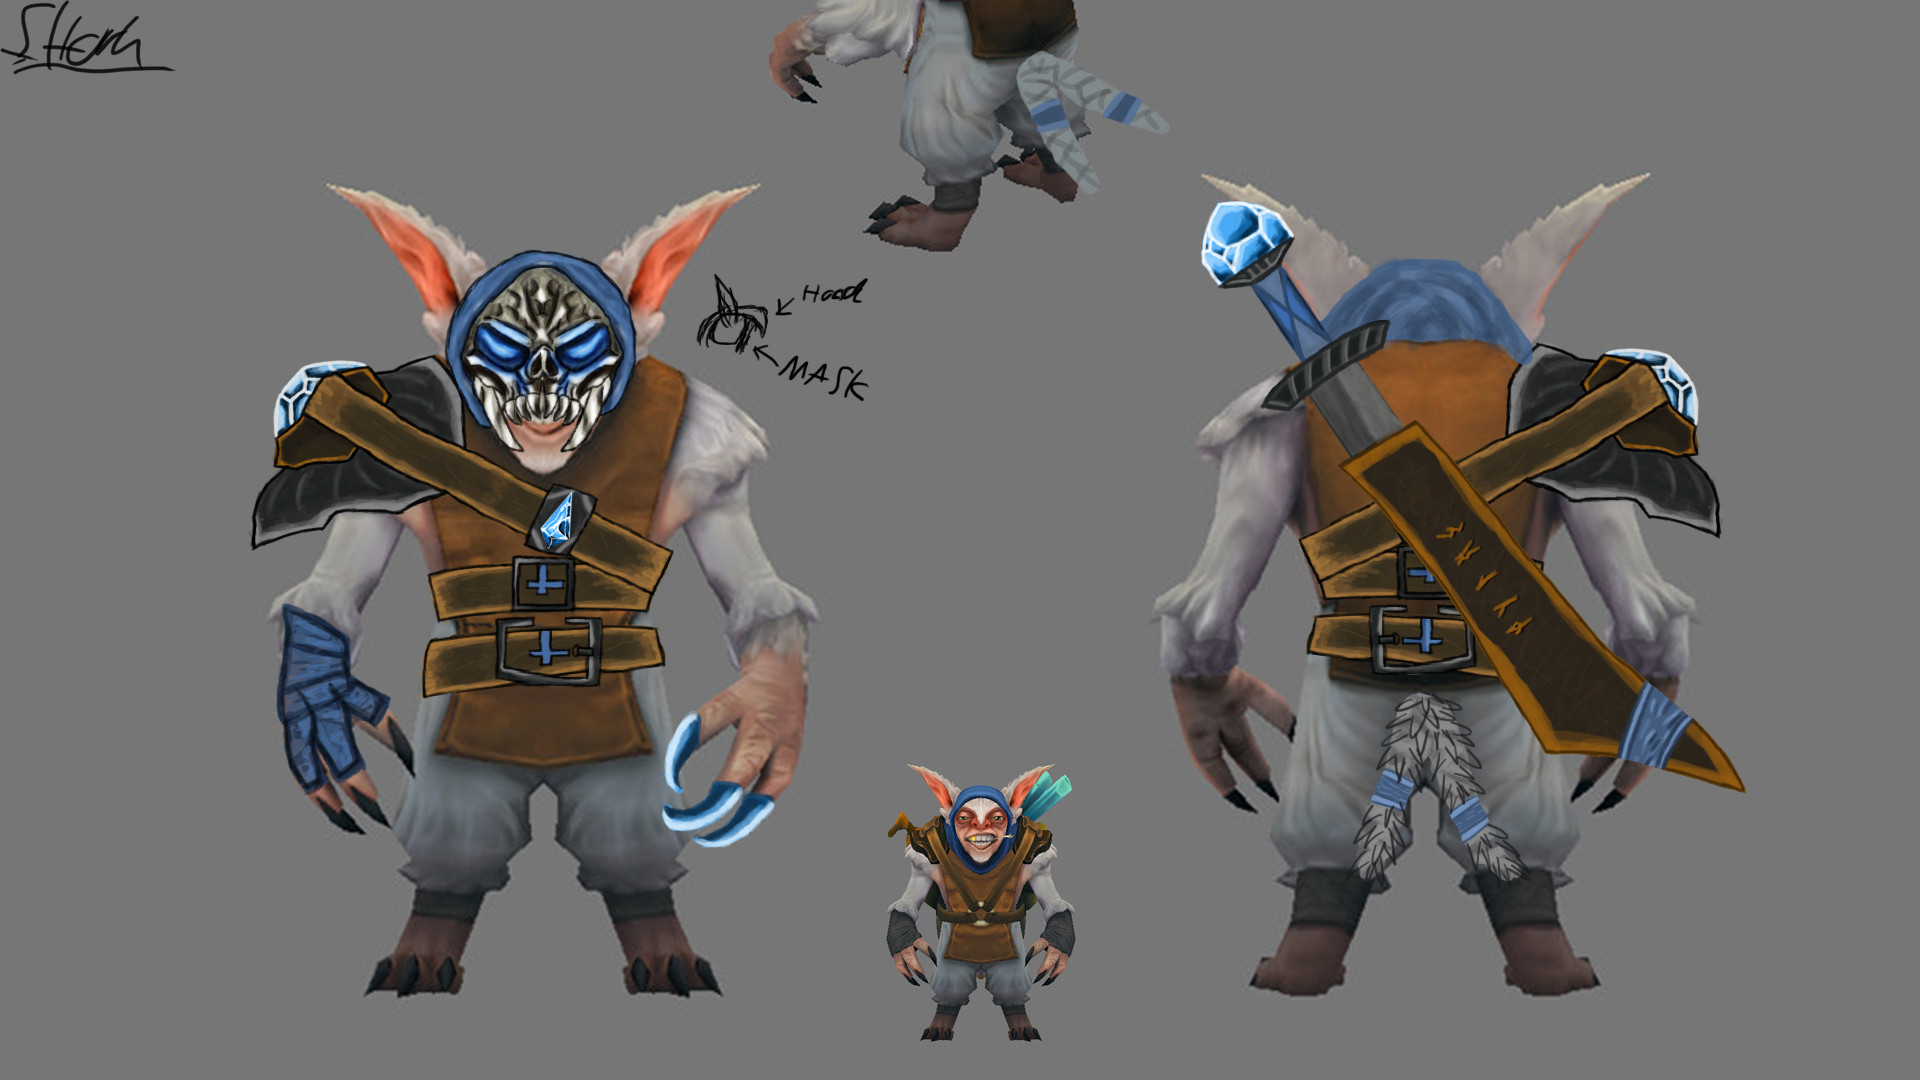 Download Wallpaper Meepo Concept Set Dota 2 - Pc Game , HD Wallpaper & Backgrounds